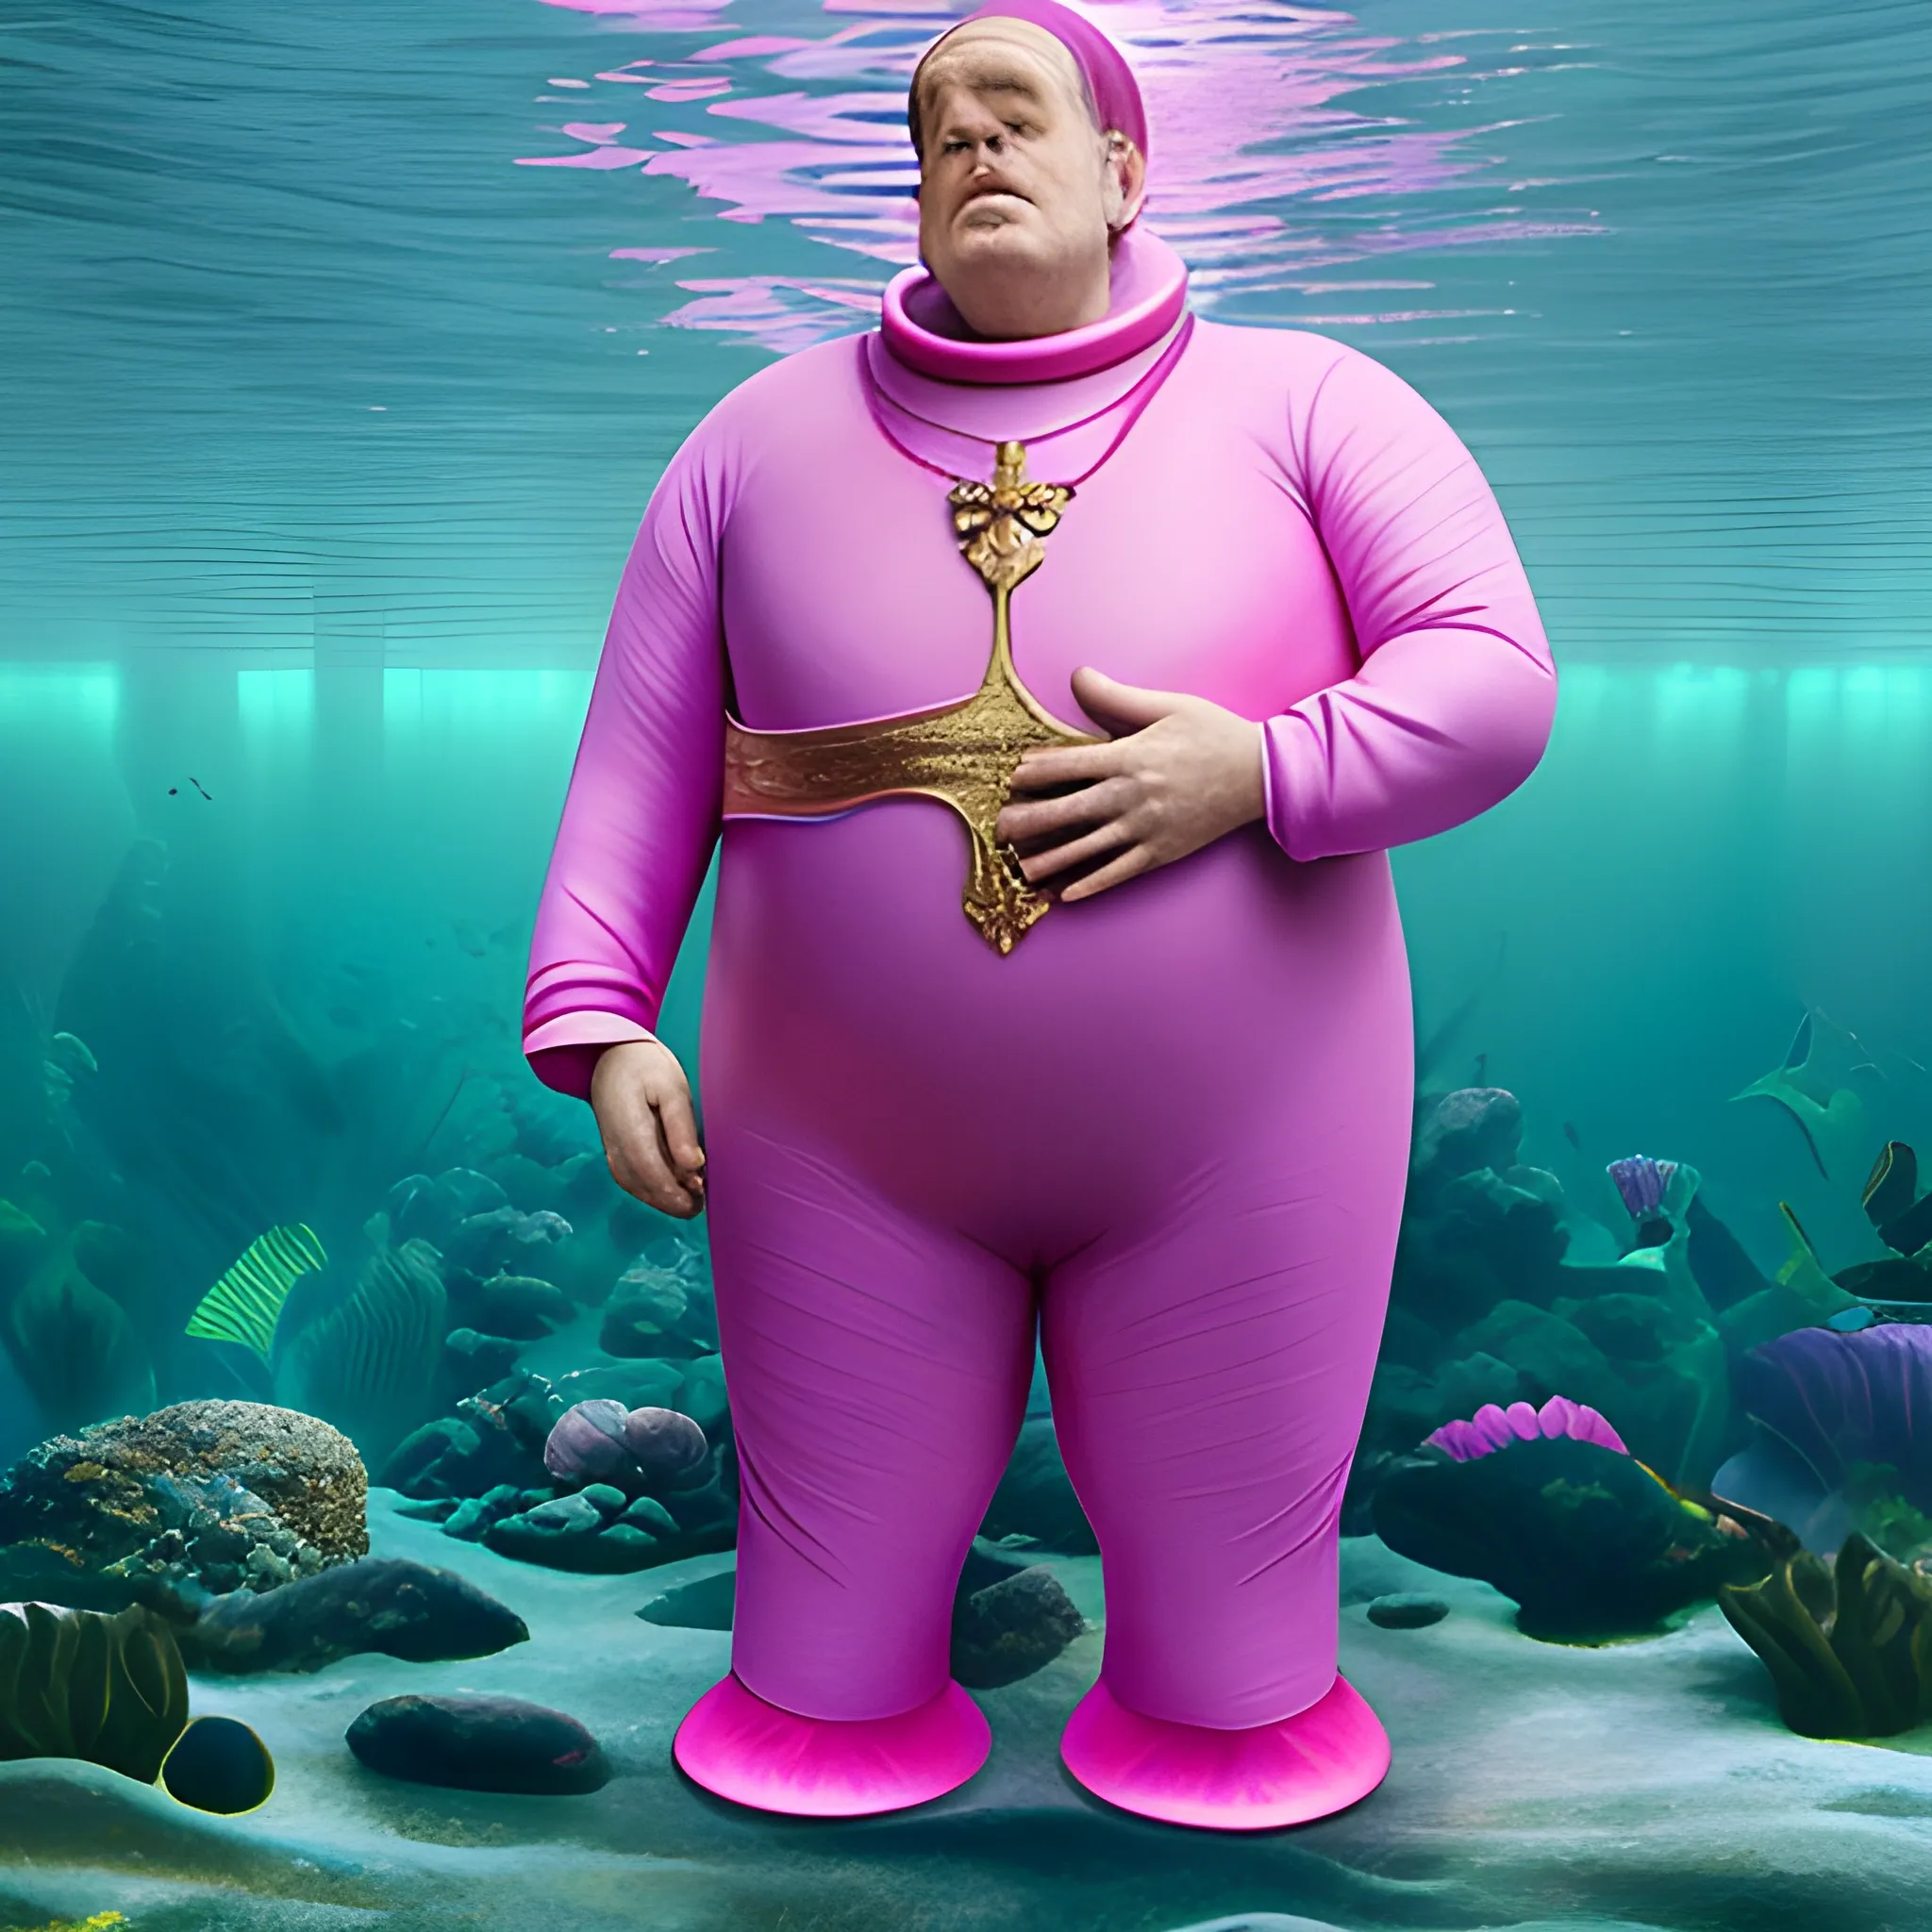 tall man with dwarfism in mermaid suit, nuns in pink suits, space